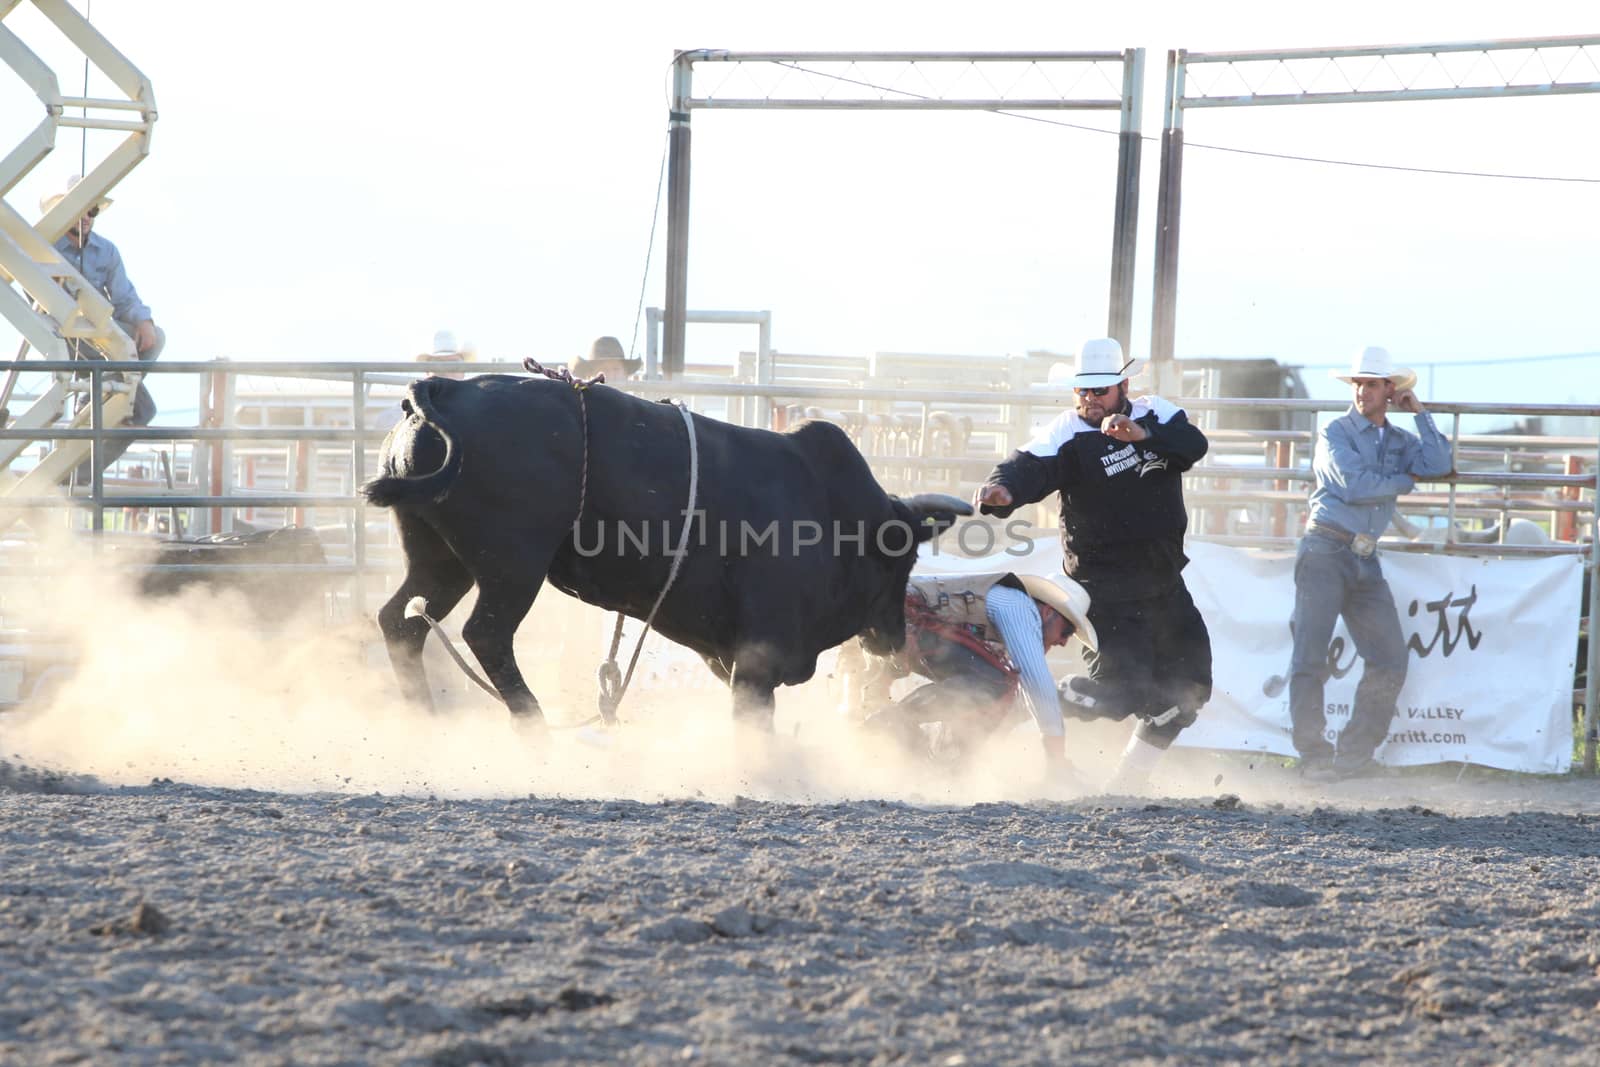 Ty Pozzobon Invitational PBR by vanell